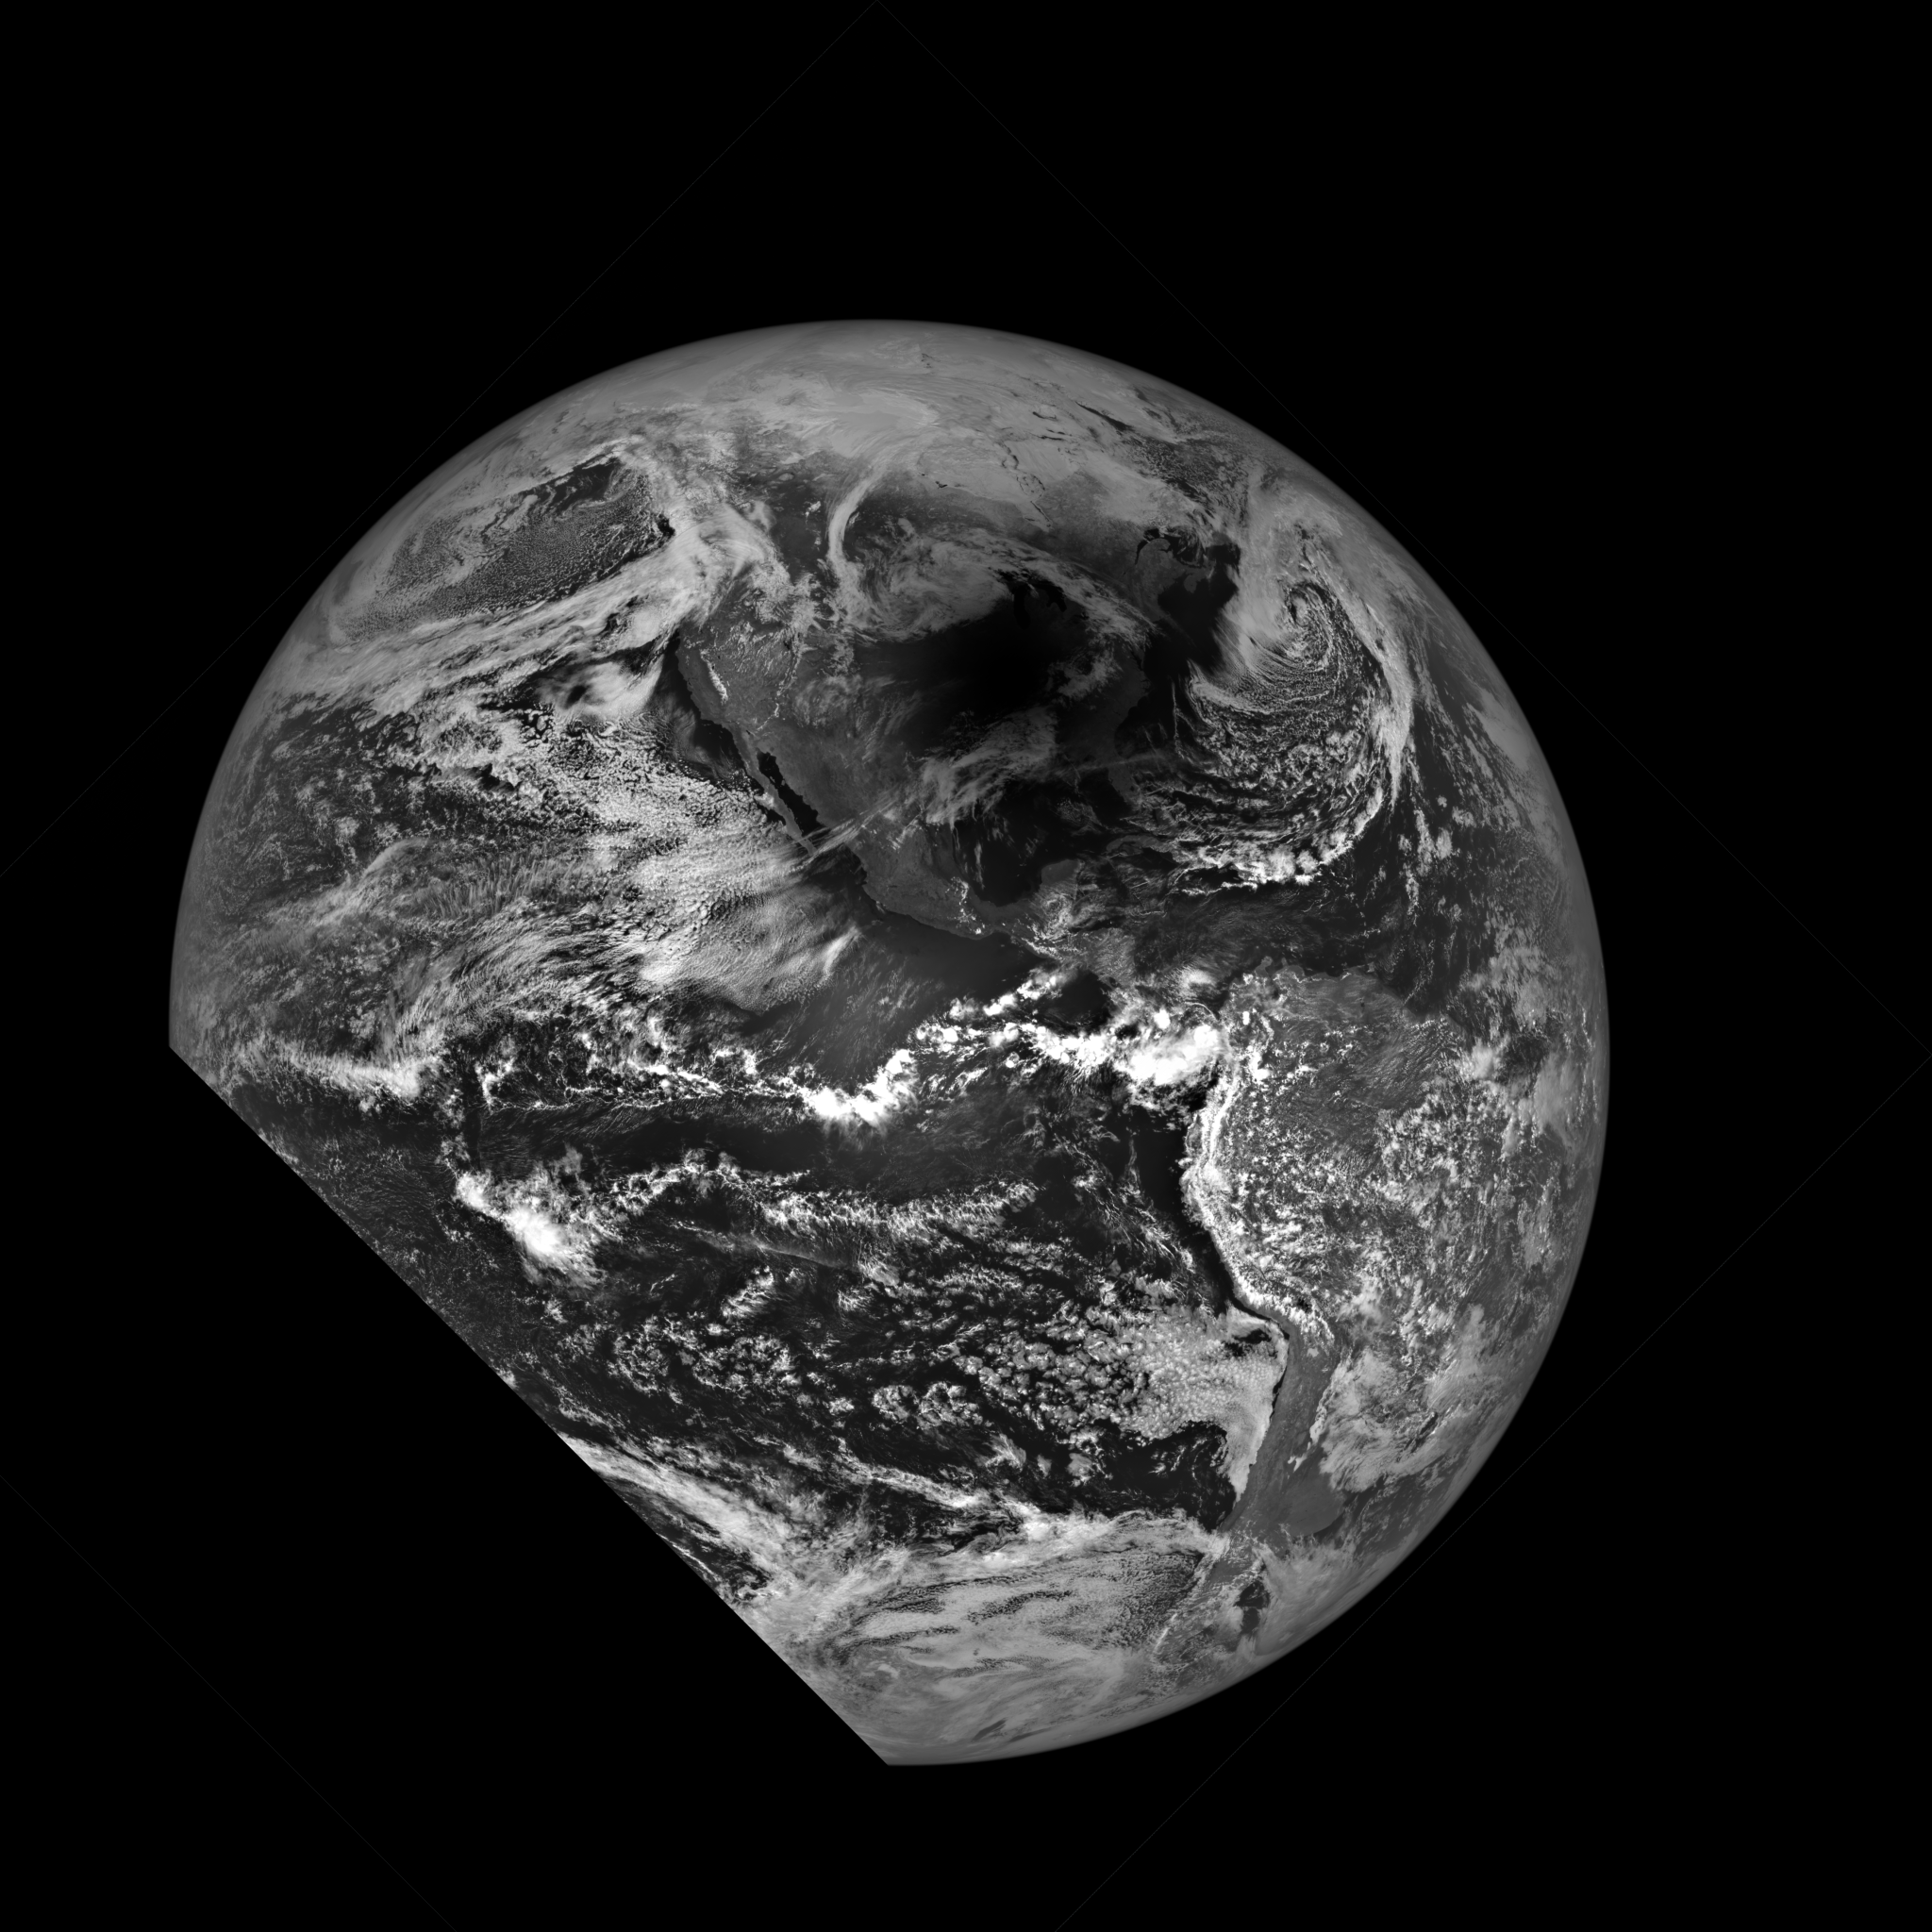 Black and white image of Earth with swirling white clouds and a dark shadow over North America from the Moon eclipsing the Sun.